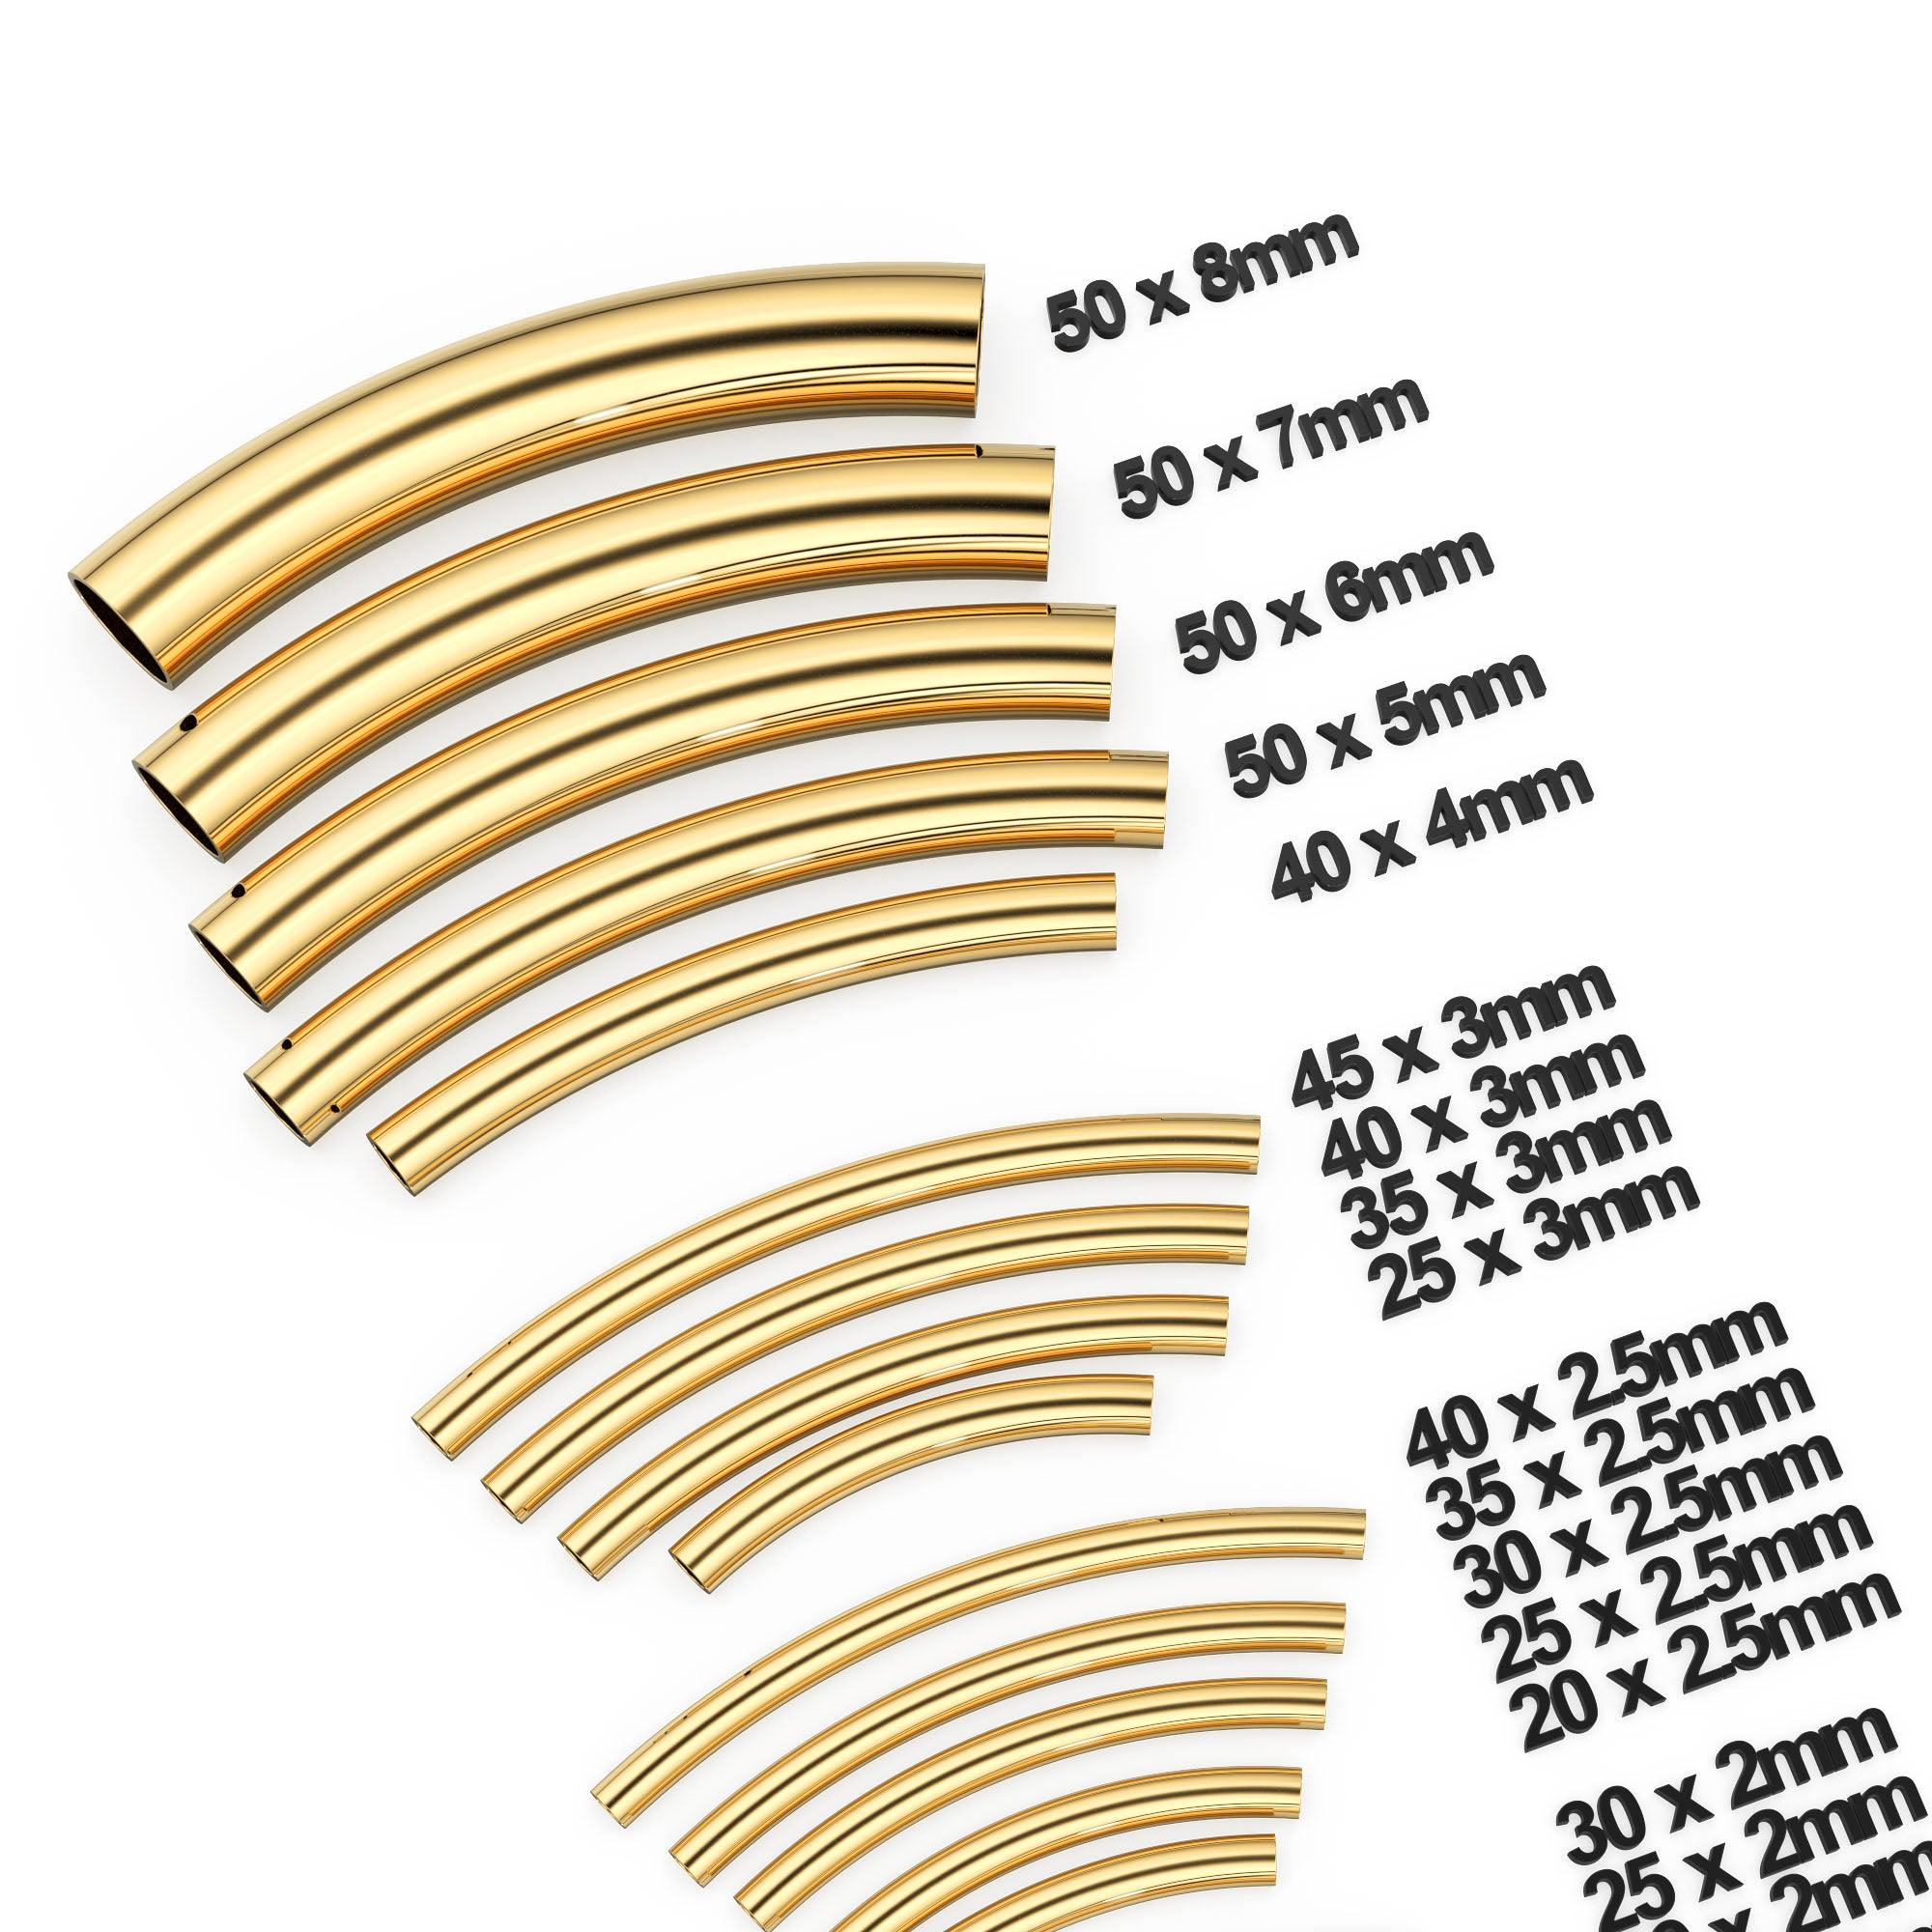 20x Gold Curved Tube Beads 15mm Elbow Noodle Spacer Bars Beading